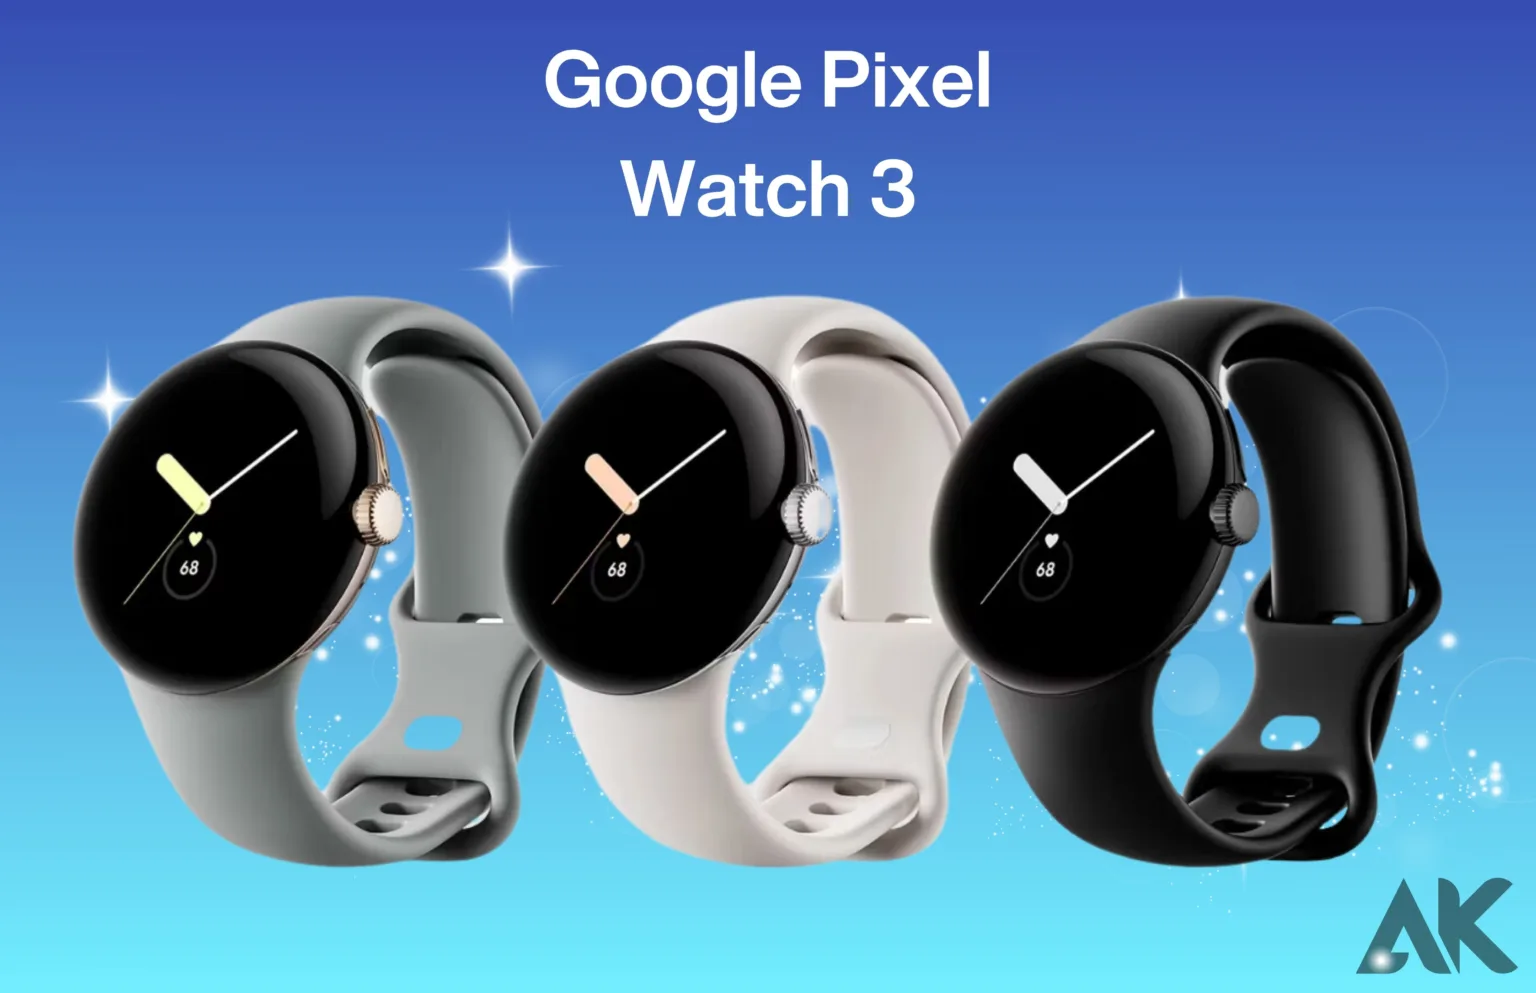 Examining the Display of the Pixel Watch 3